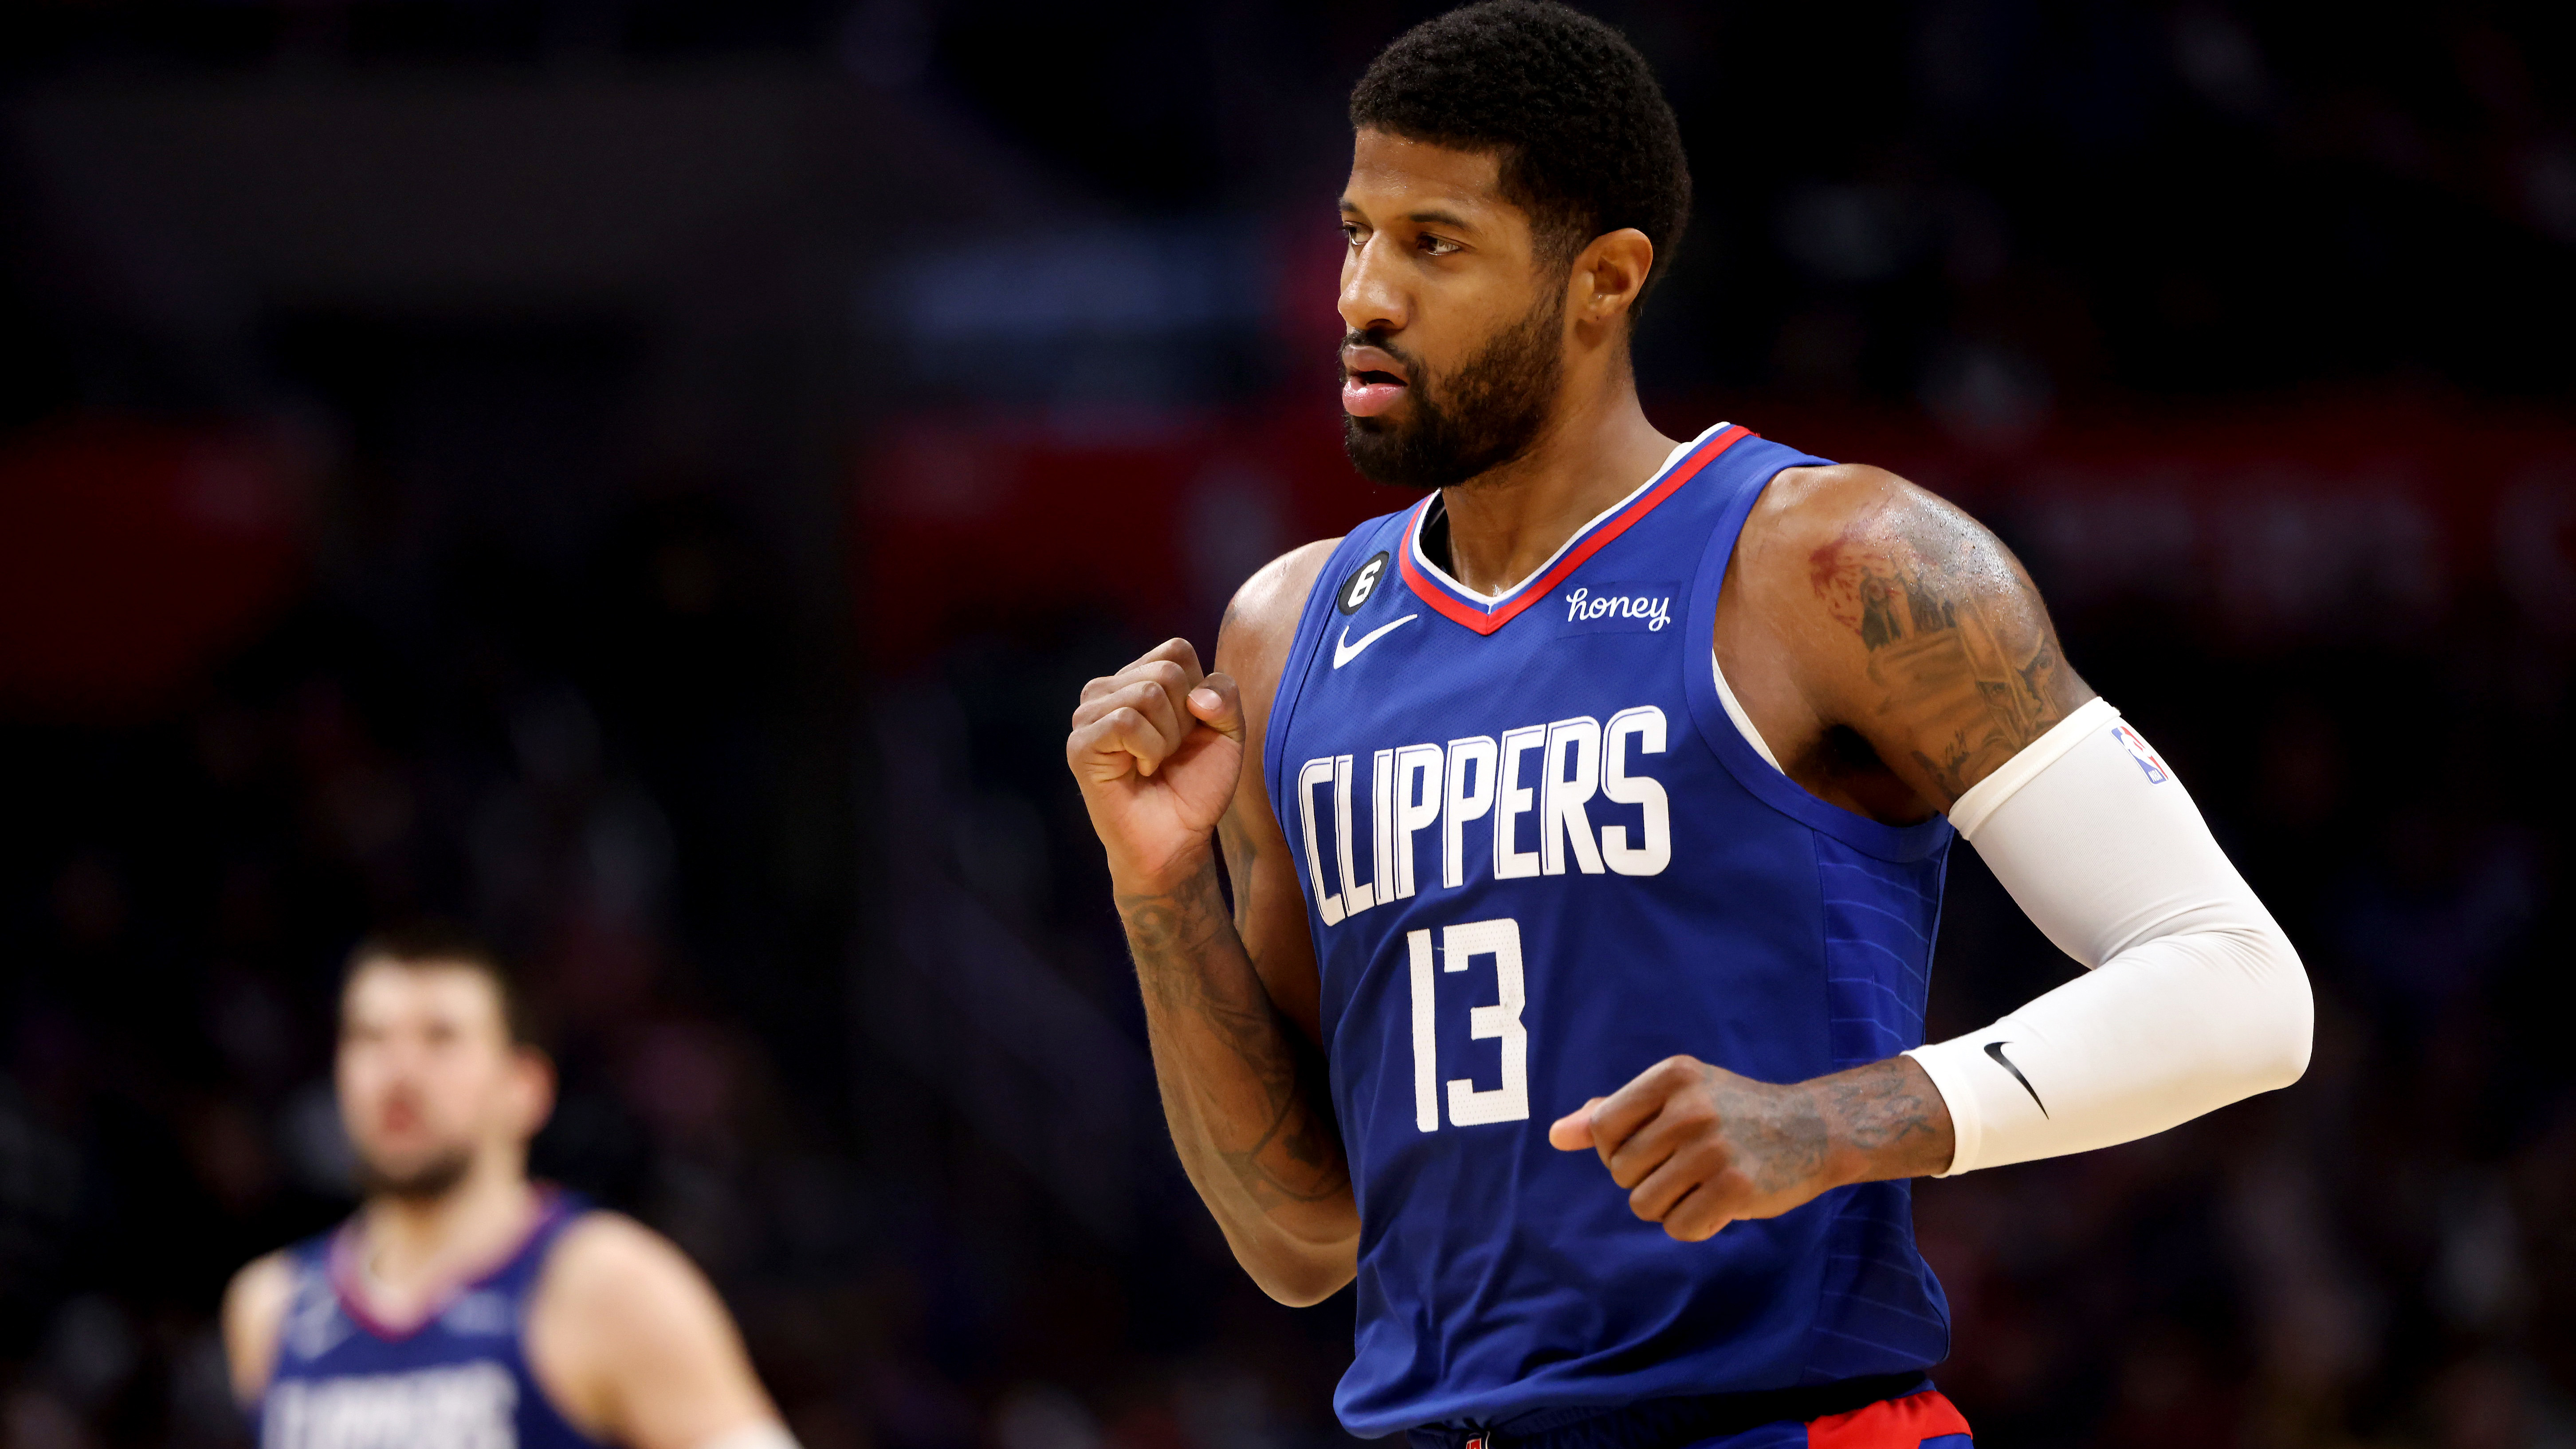 Los Angeles Clippers: Paul George bounces back in Game 5